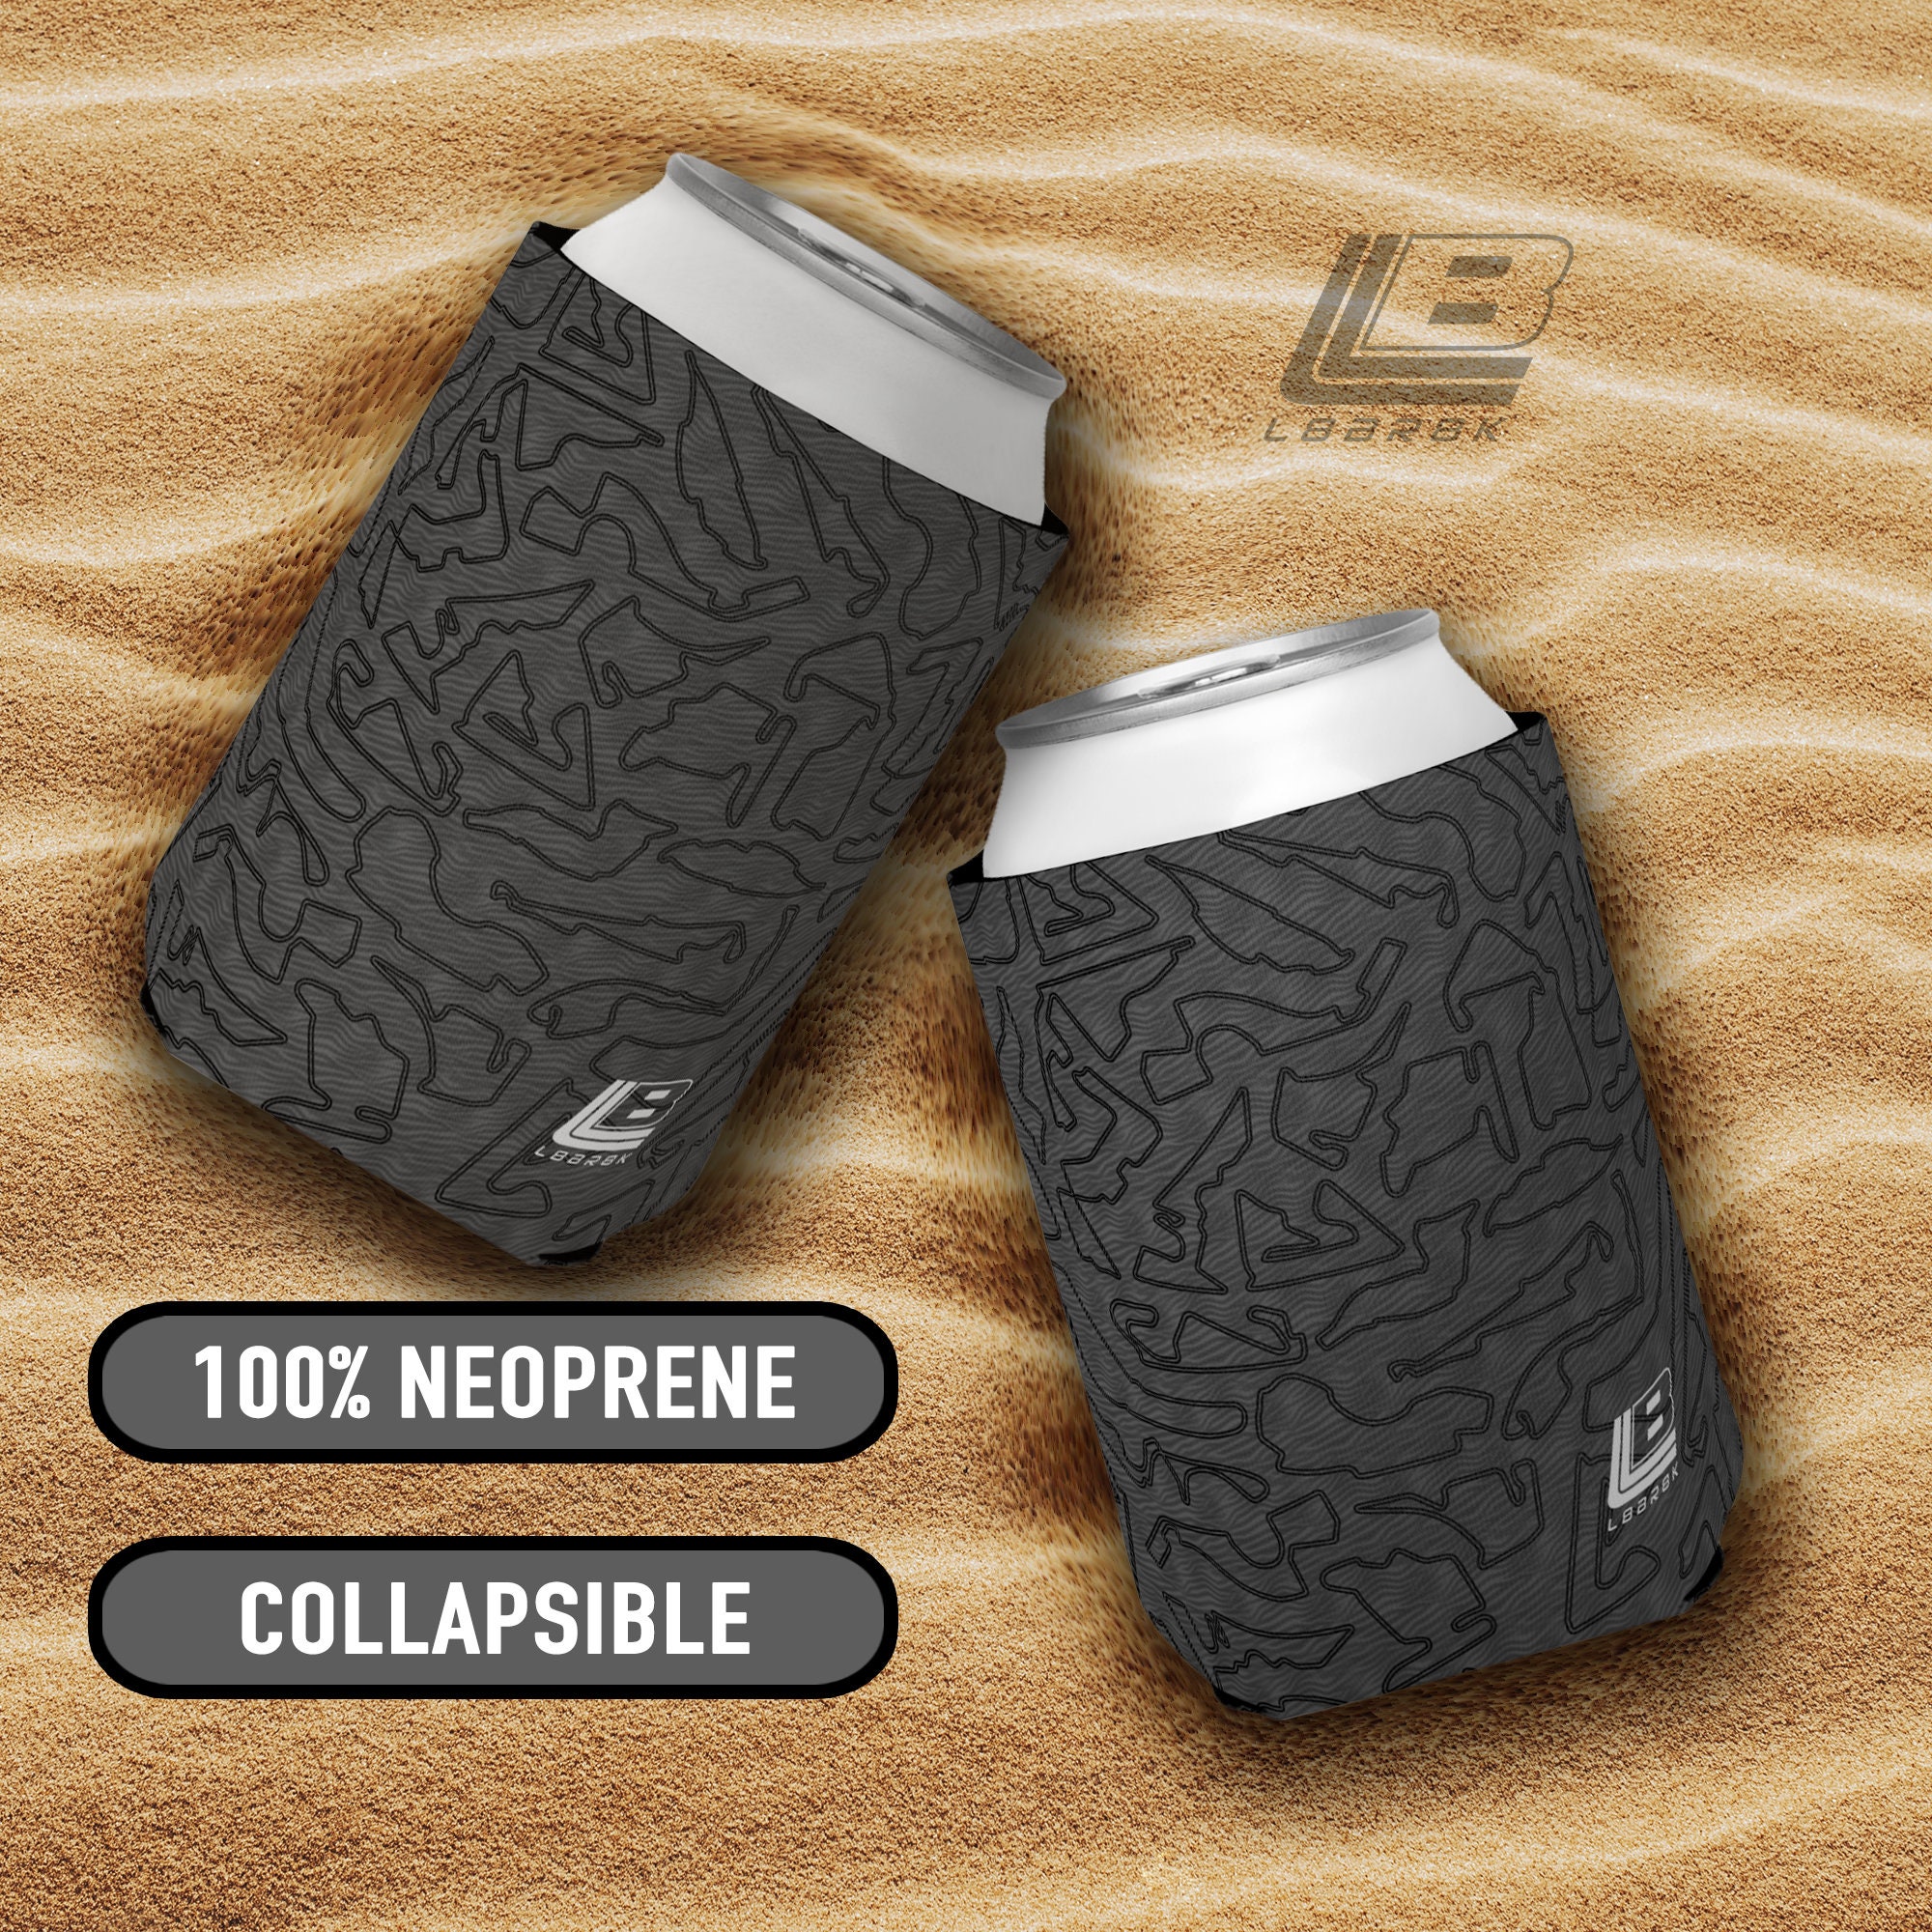 Snappers Bottle Koozies (8-Pack) – Snappers Key Largo